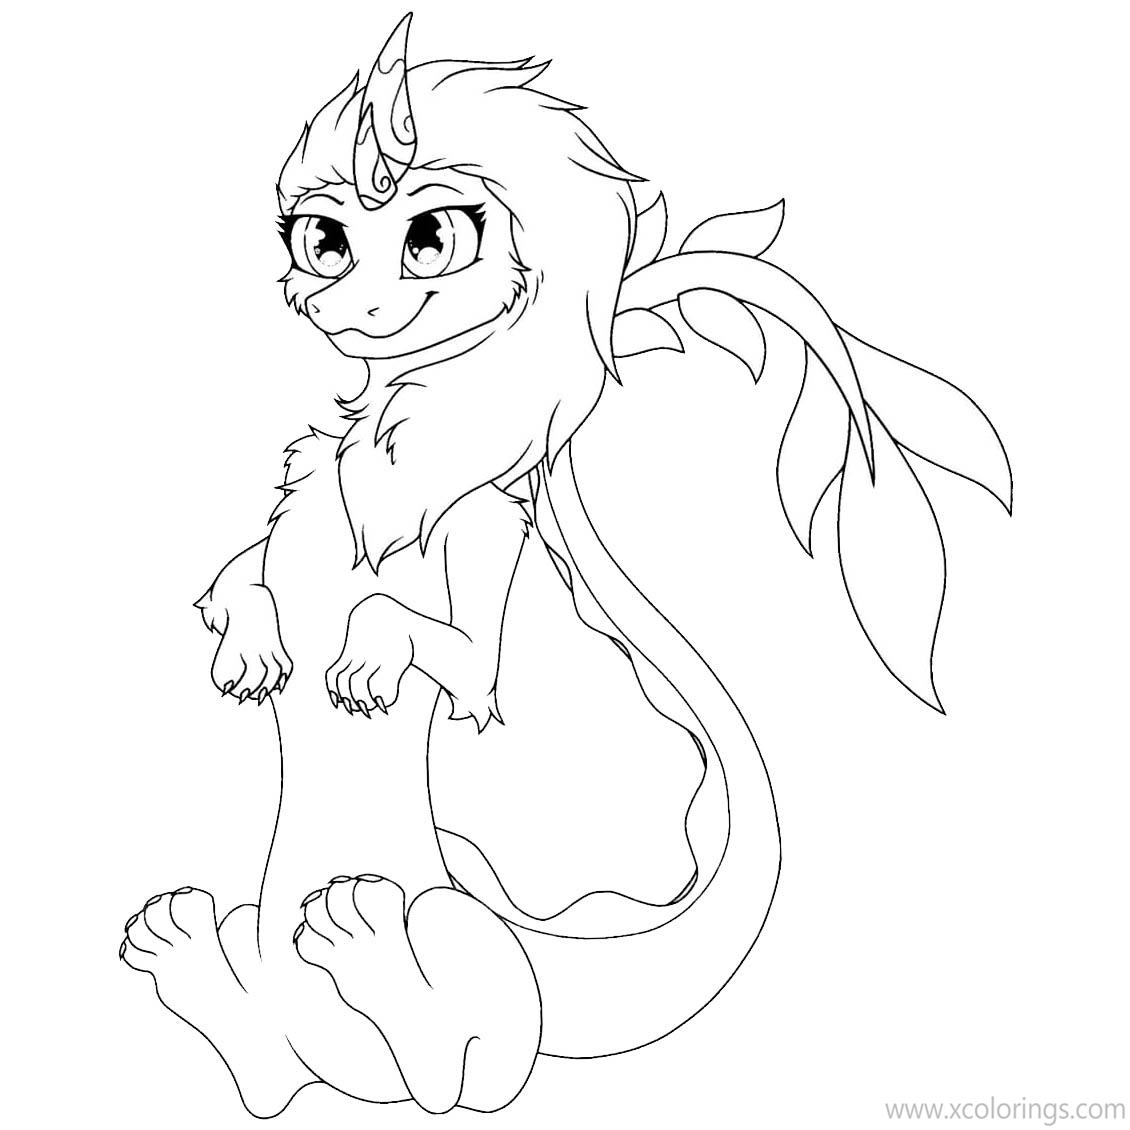 Disney Film Raya And The Last Dragon Coloring Pages XColorings com